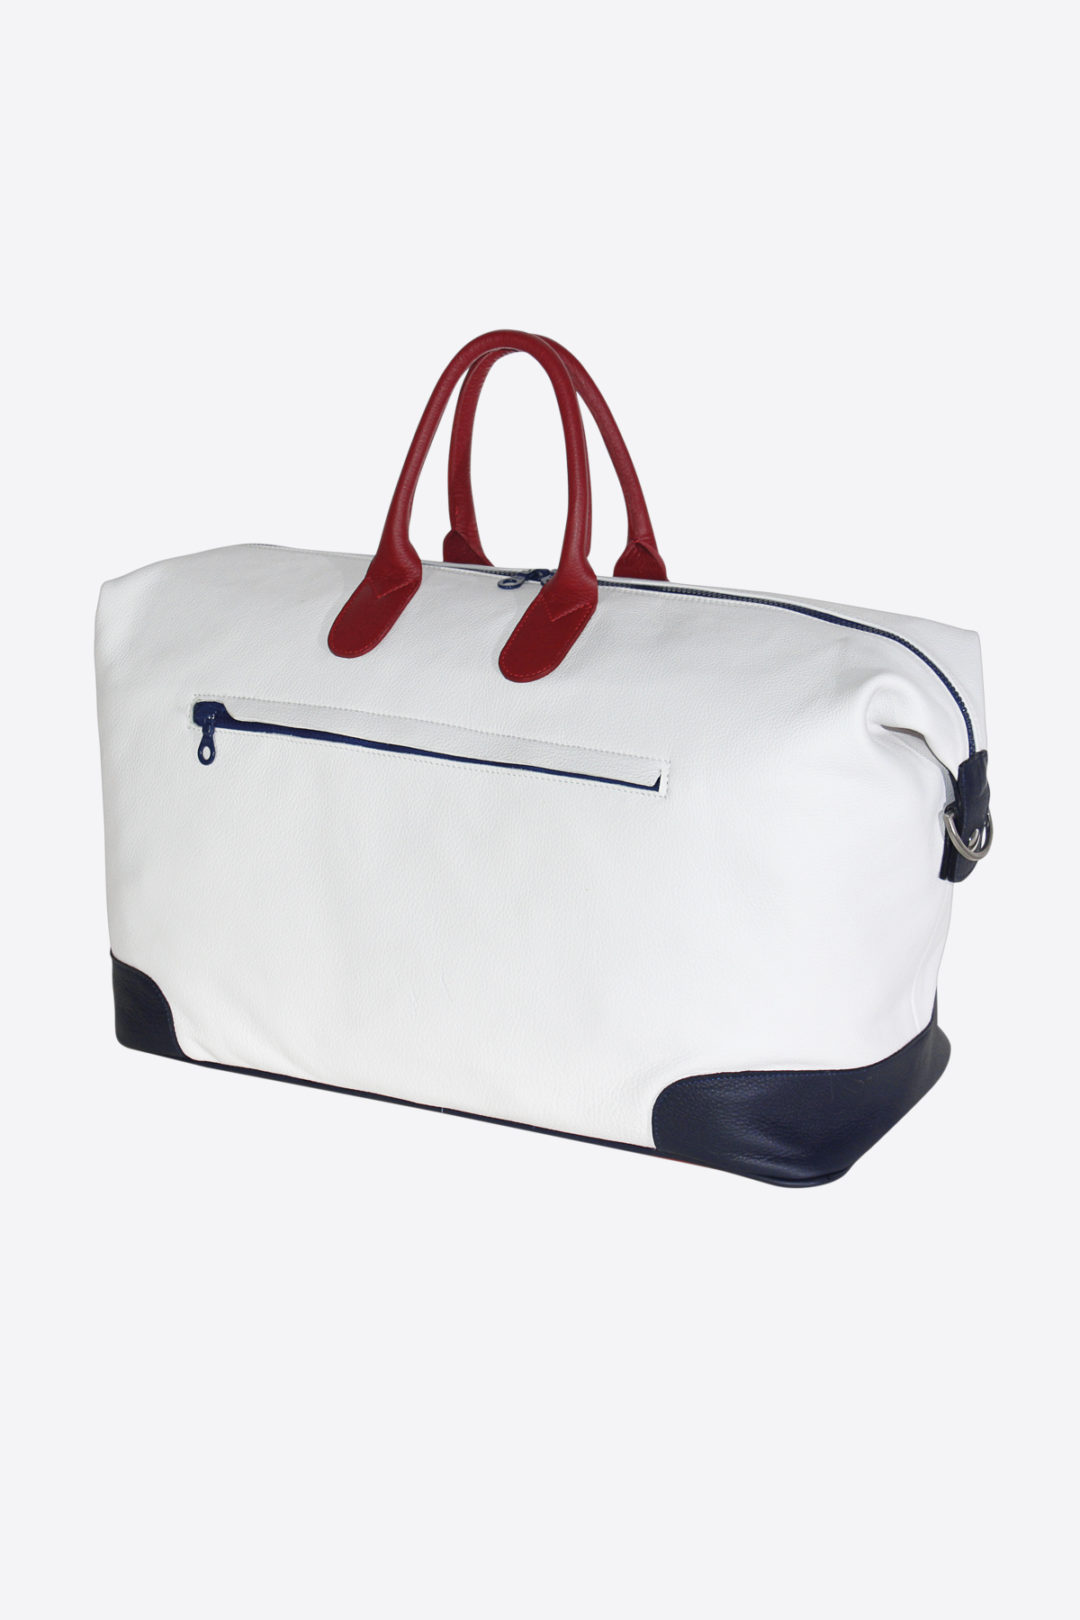 Antique Duffle Bag 038 front leather waterproof white blue red